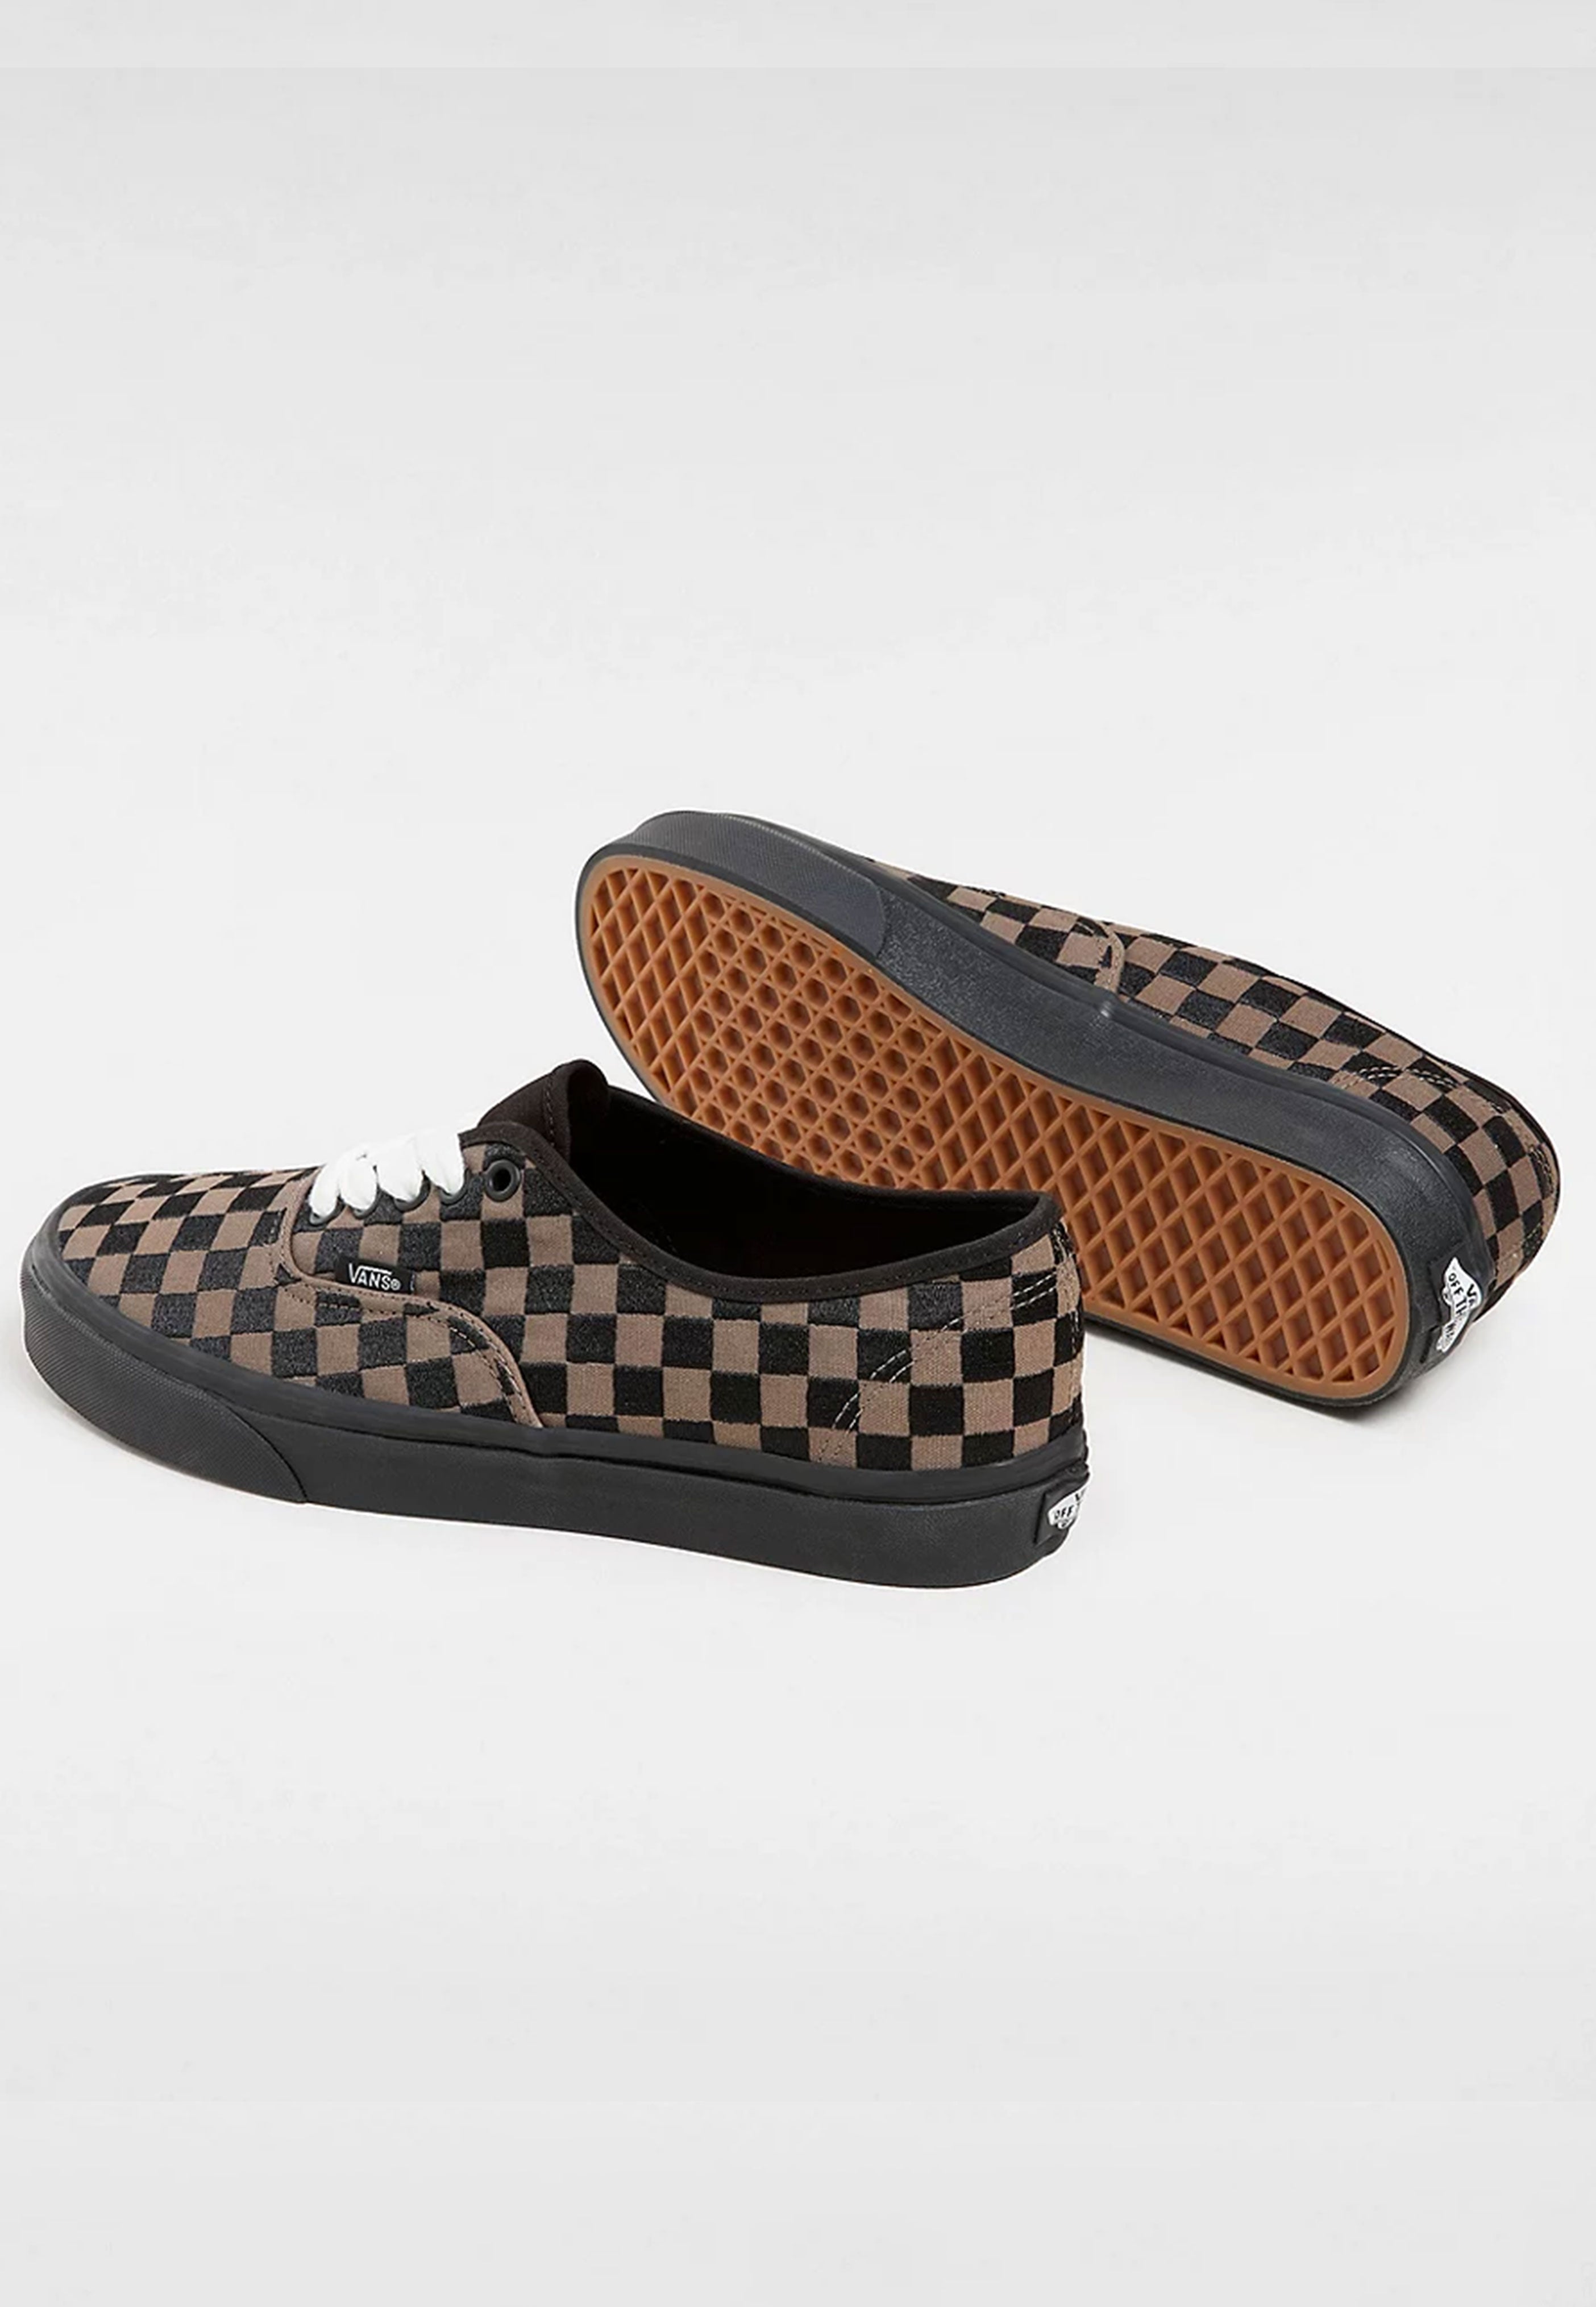 Vans - Authentic Embroidered Checker Black - Shoes